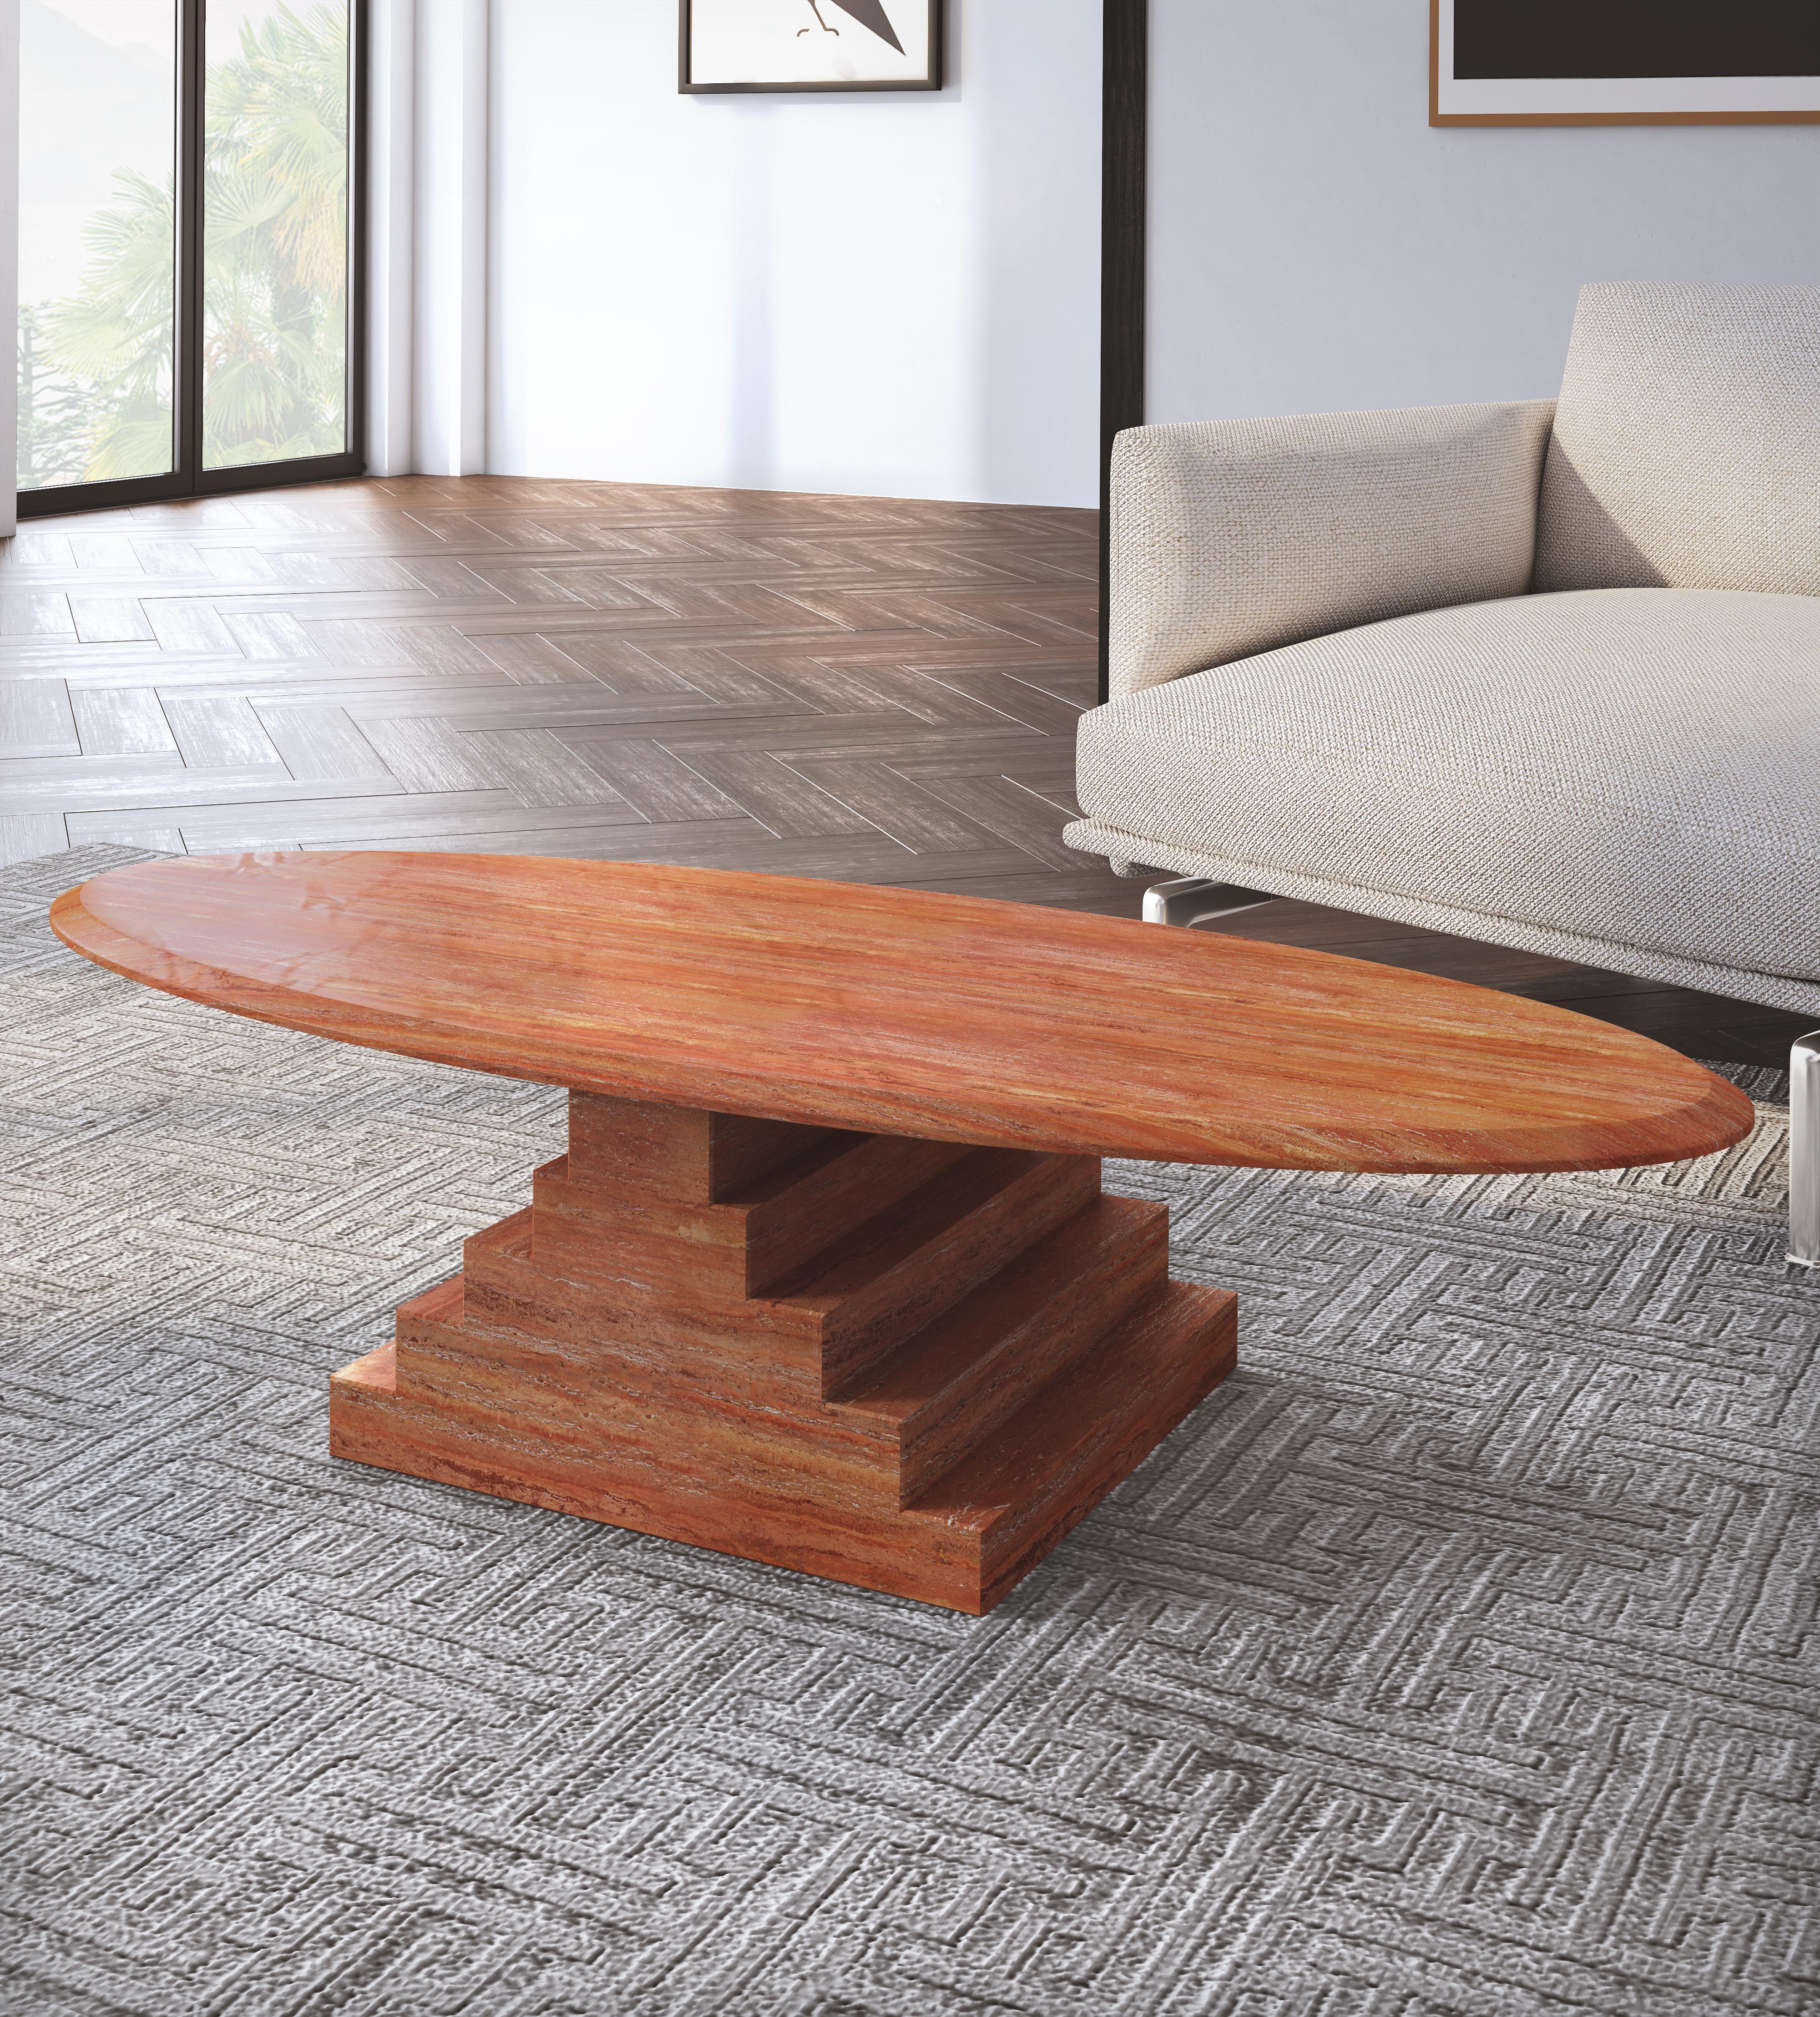 Hand-Crafted  NORDST NIKO Coffee Table, Italian Red Travertine, Danish Modern Design, New For Sale